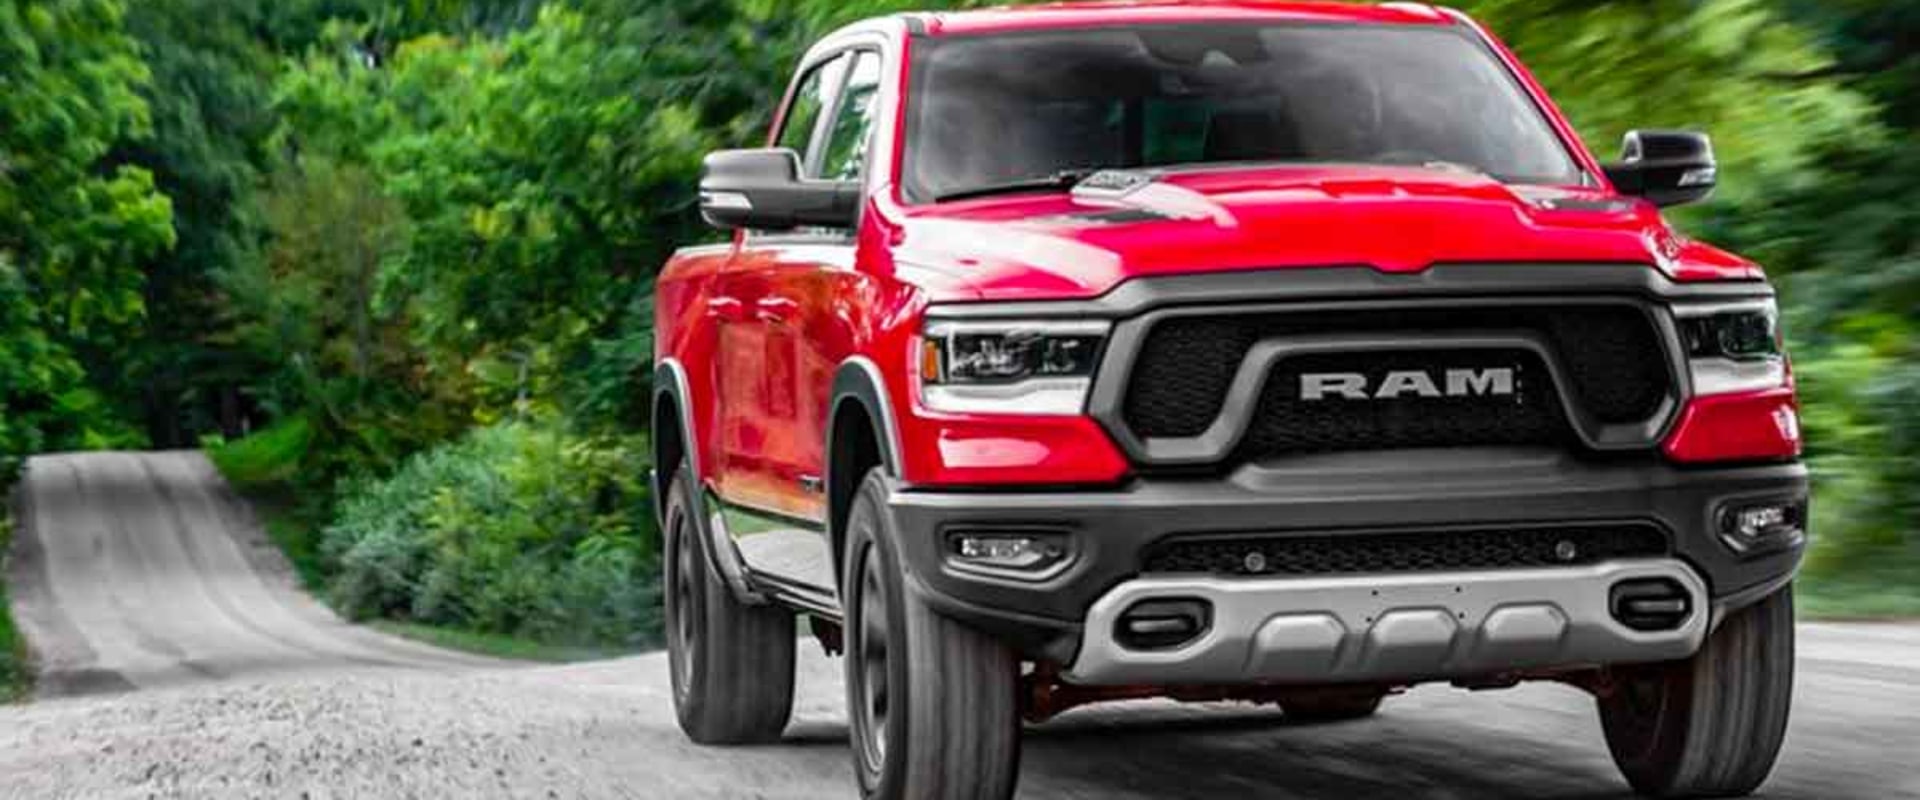 The Iconic Dodge Ram 1500: An Overview